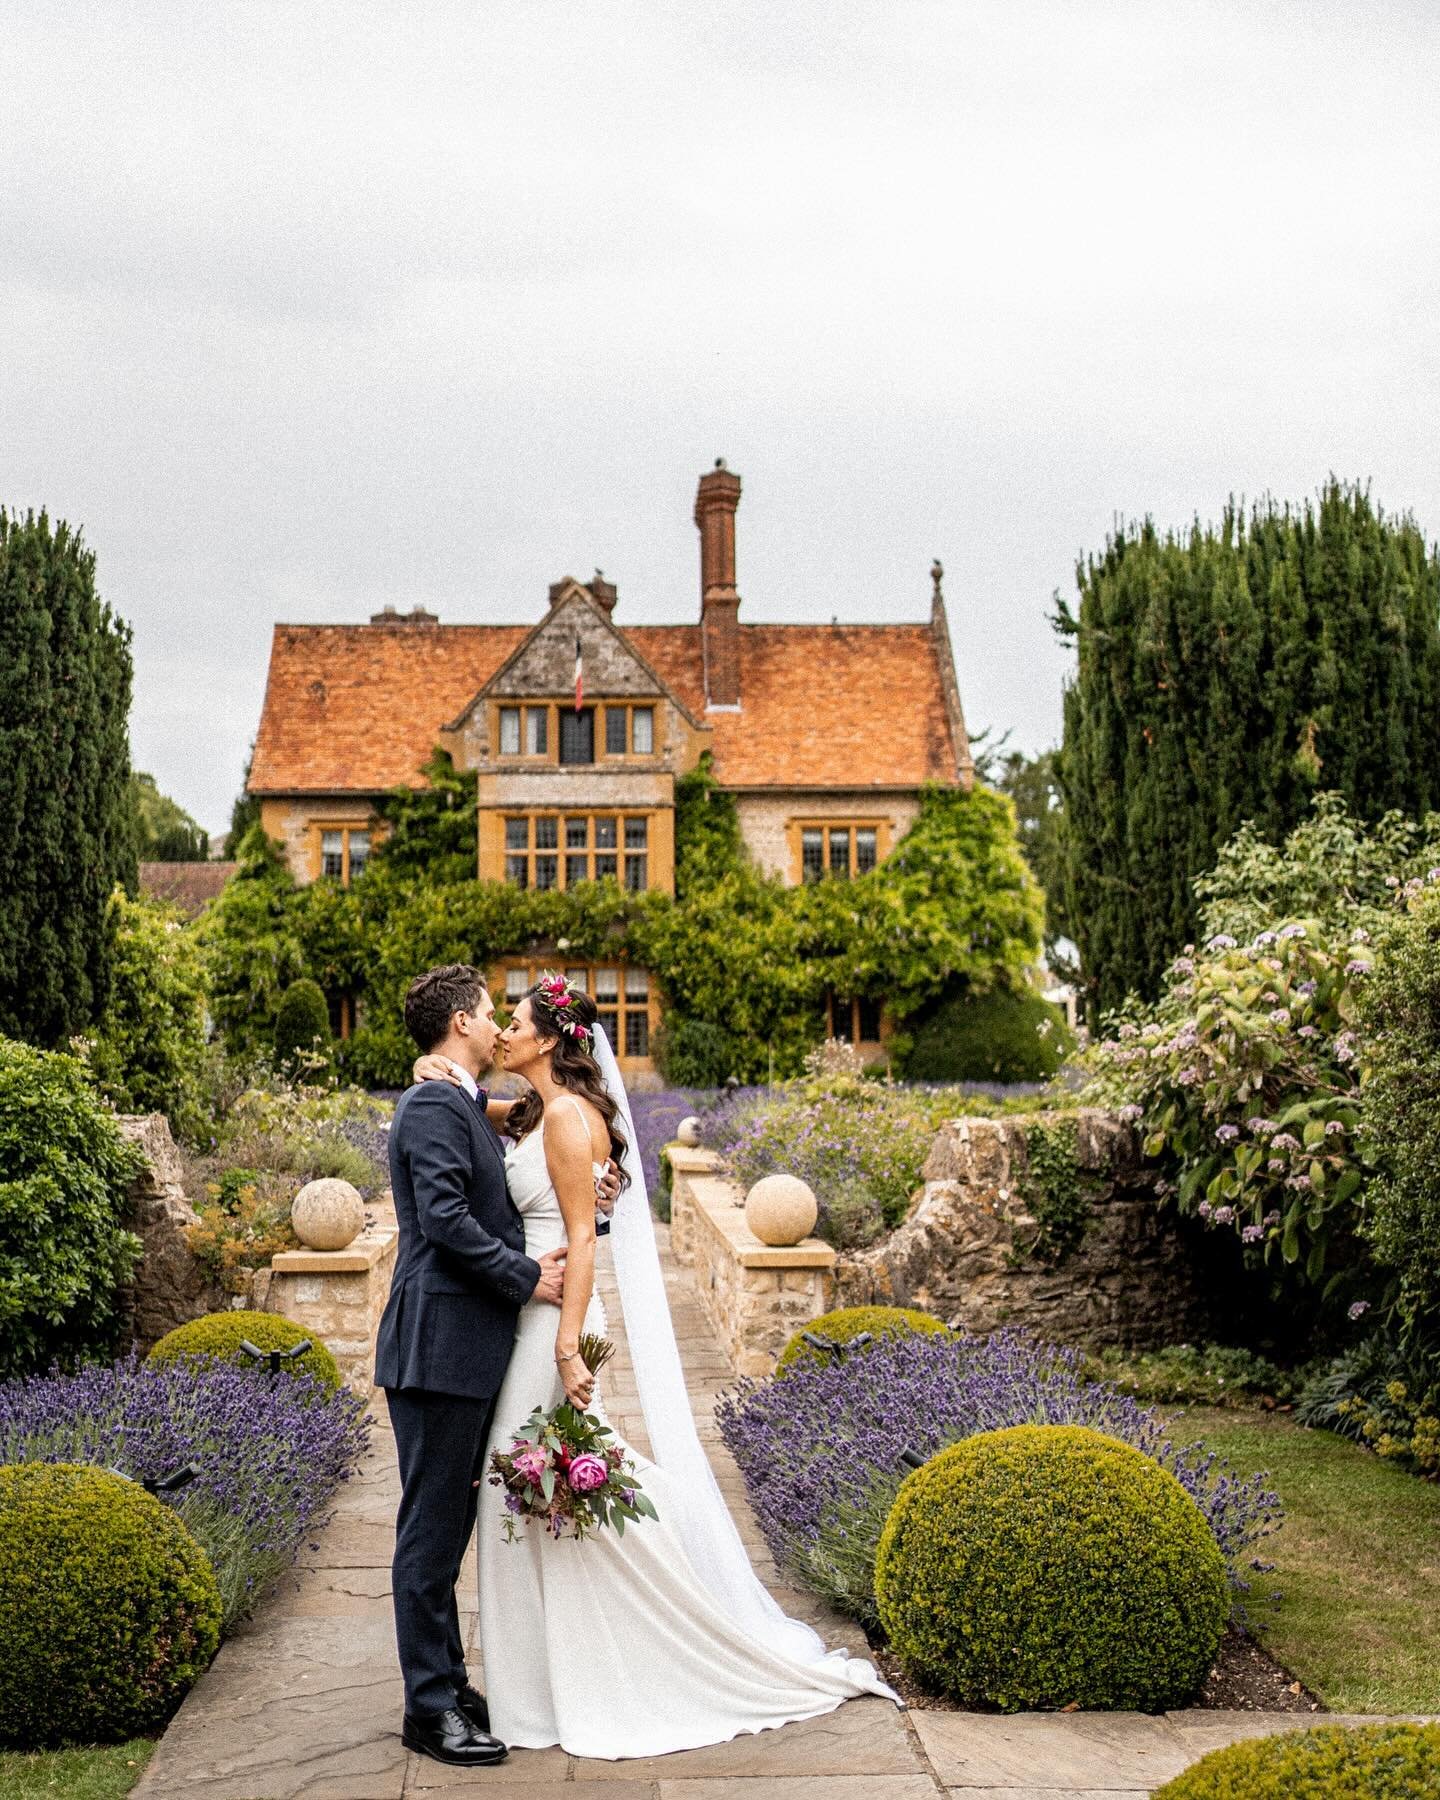 Will never get over how gorgeous these two were (&amp; are!) on their wedding day at Le Manoir (@belmondlemanoir) last year. Such a compliment to the already beautiful gardens which the venue pride themselves on!!